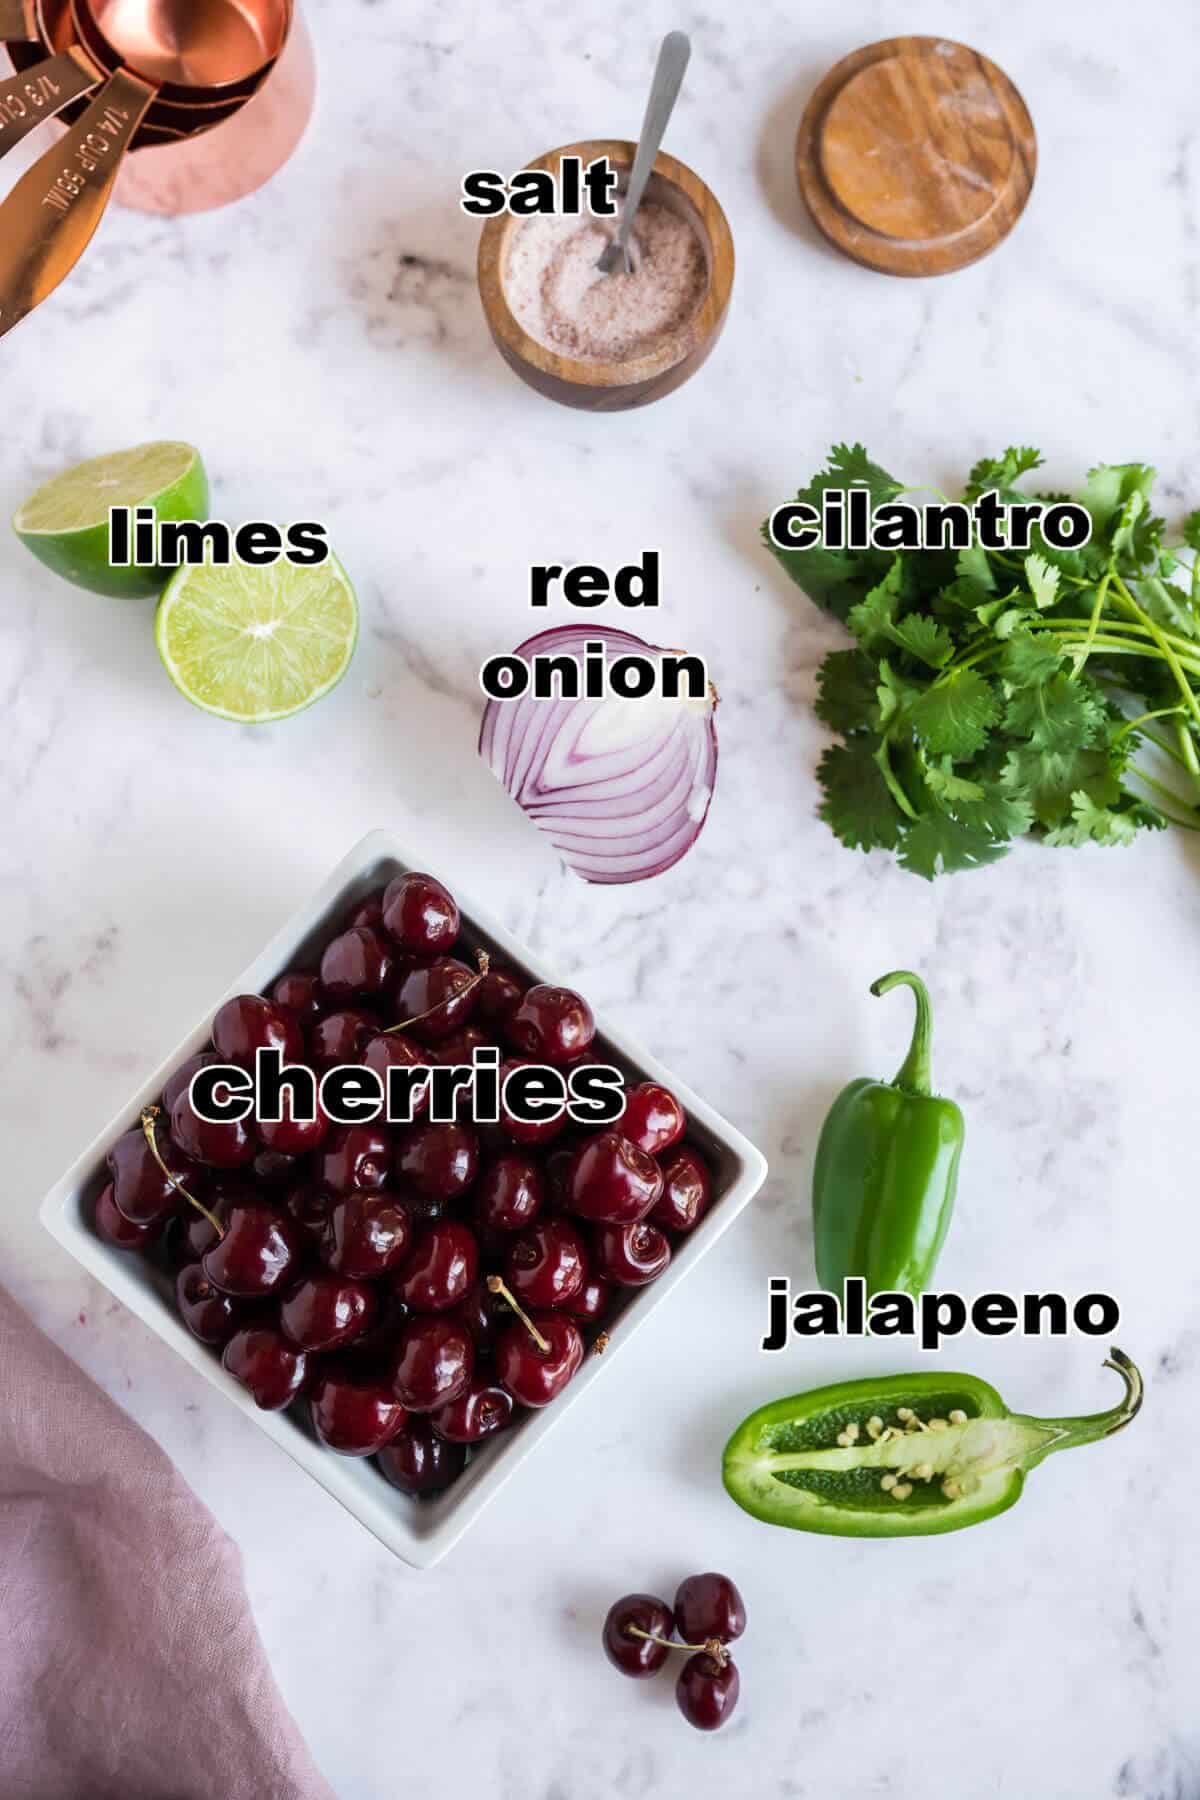 Ingredients for cherry salsa: cherries, red onion, jalapeno, lime, cilantro and salt